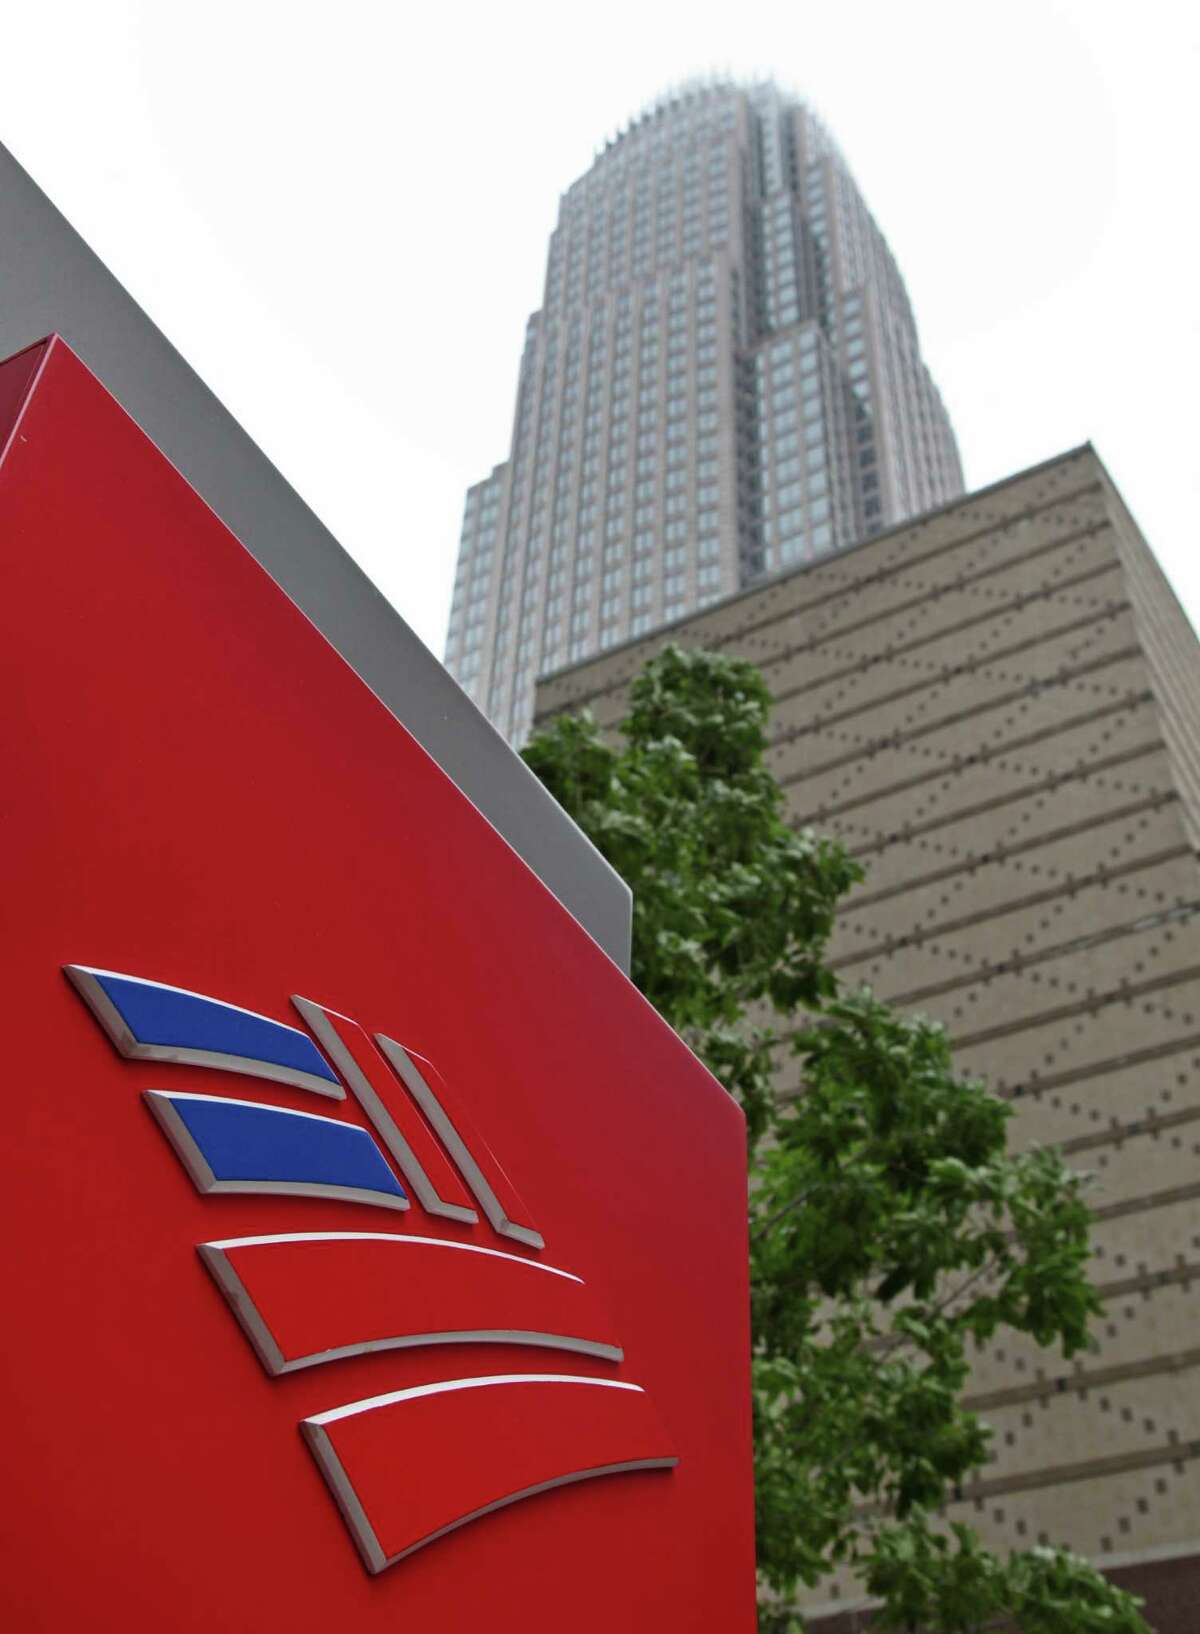 FILE -- An April 19, 2012 file photo shows Bank of America's corporate headquarters in Charlotte, N.C. Moody's Investors Service Thursday June 21, 2012 has lowered the credit ratings on some of the world's biggest banks, including Bank of America. (AP Photo/Chuck Burton)